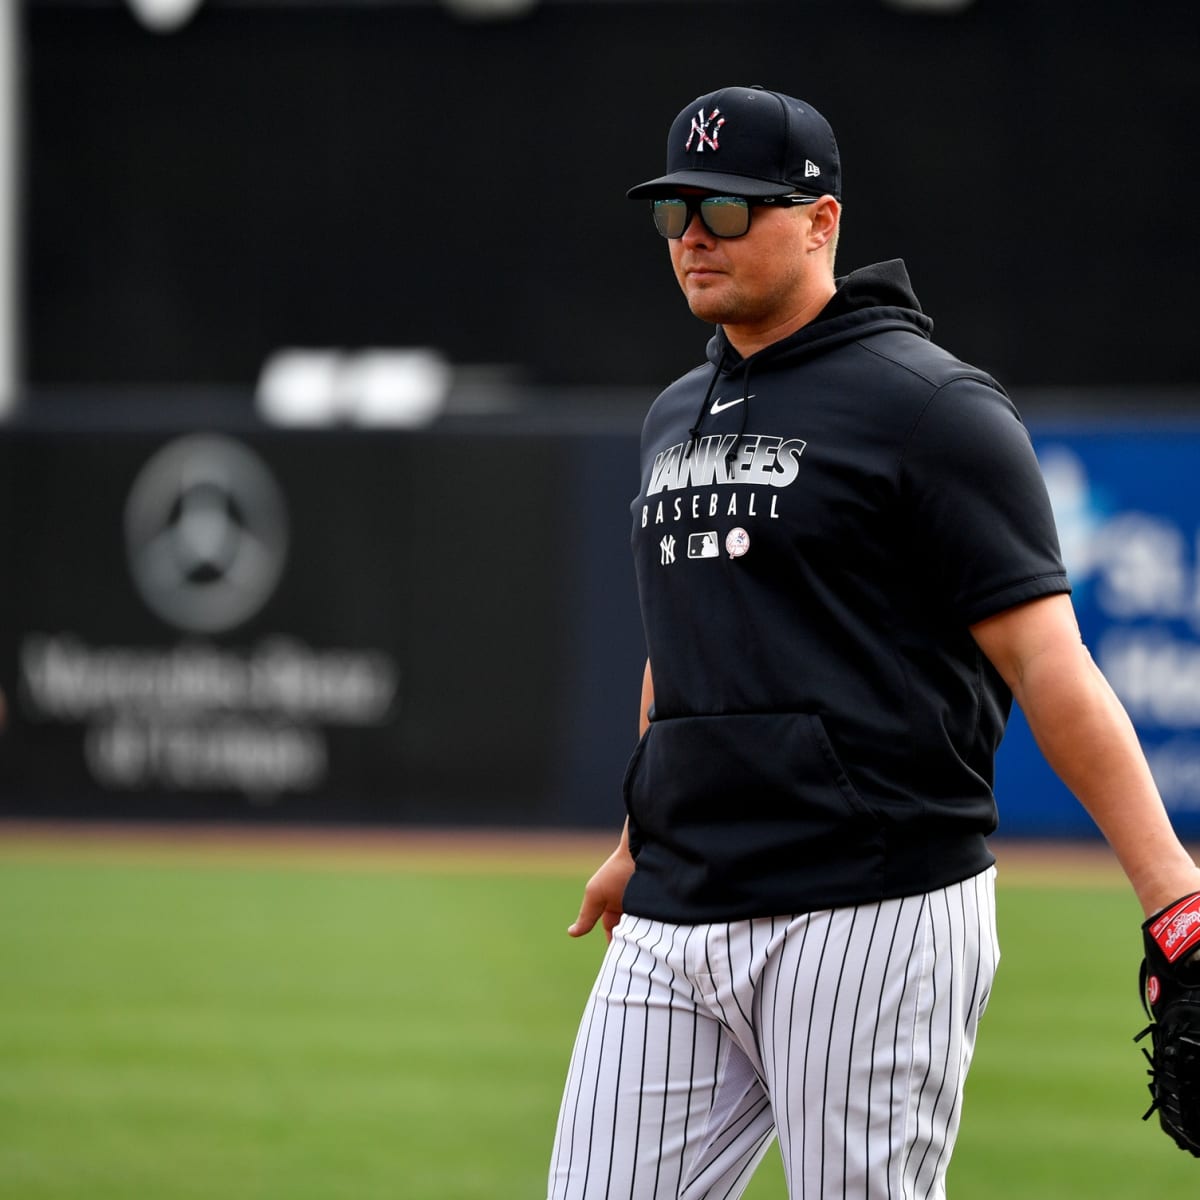 Yankees' Luke Voit struggling again as playing time decreases